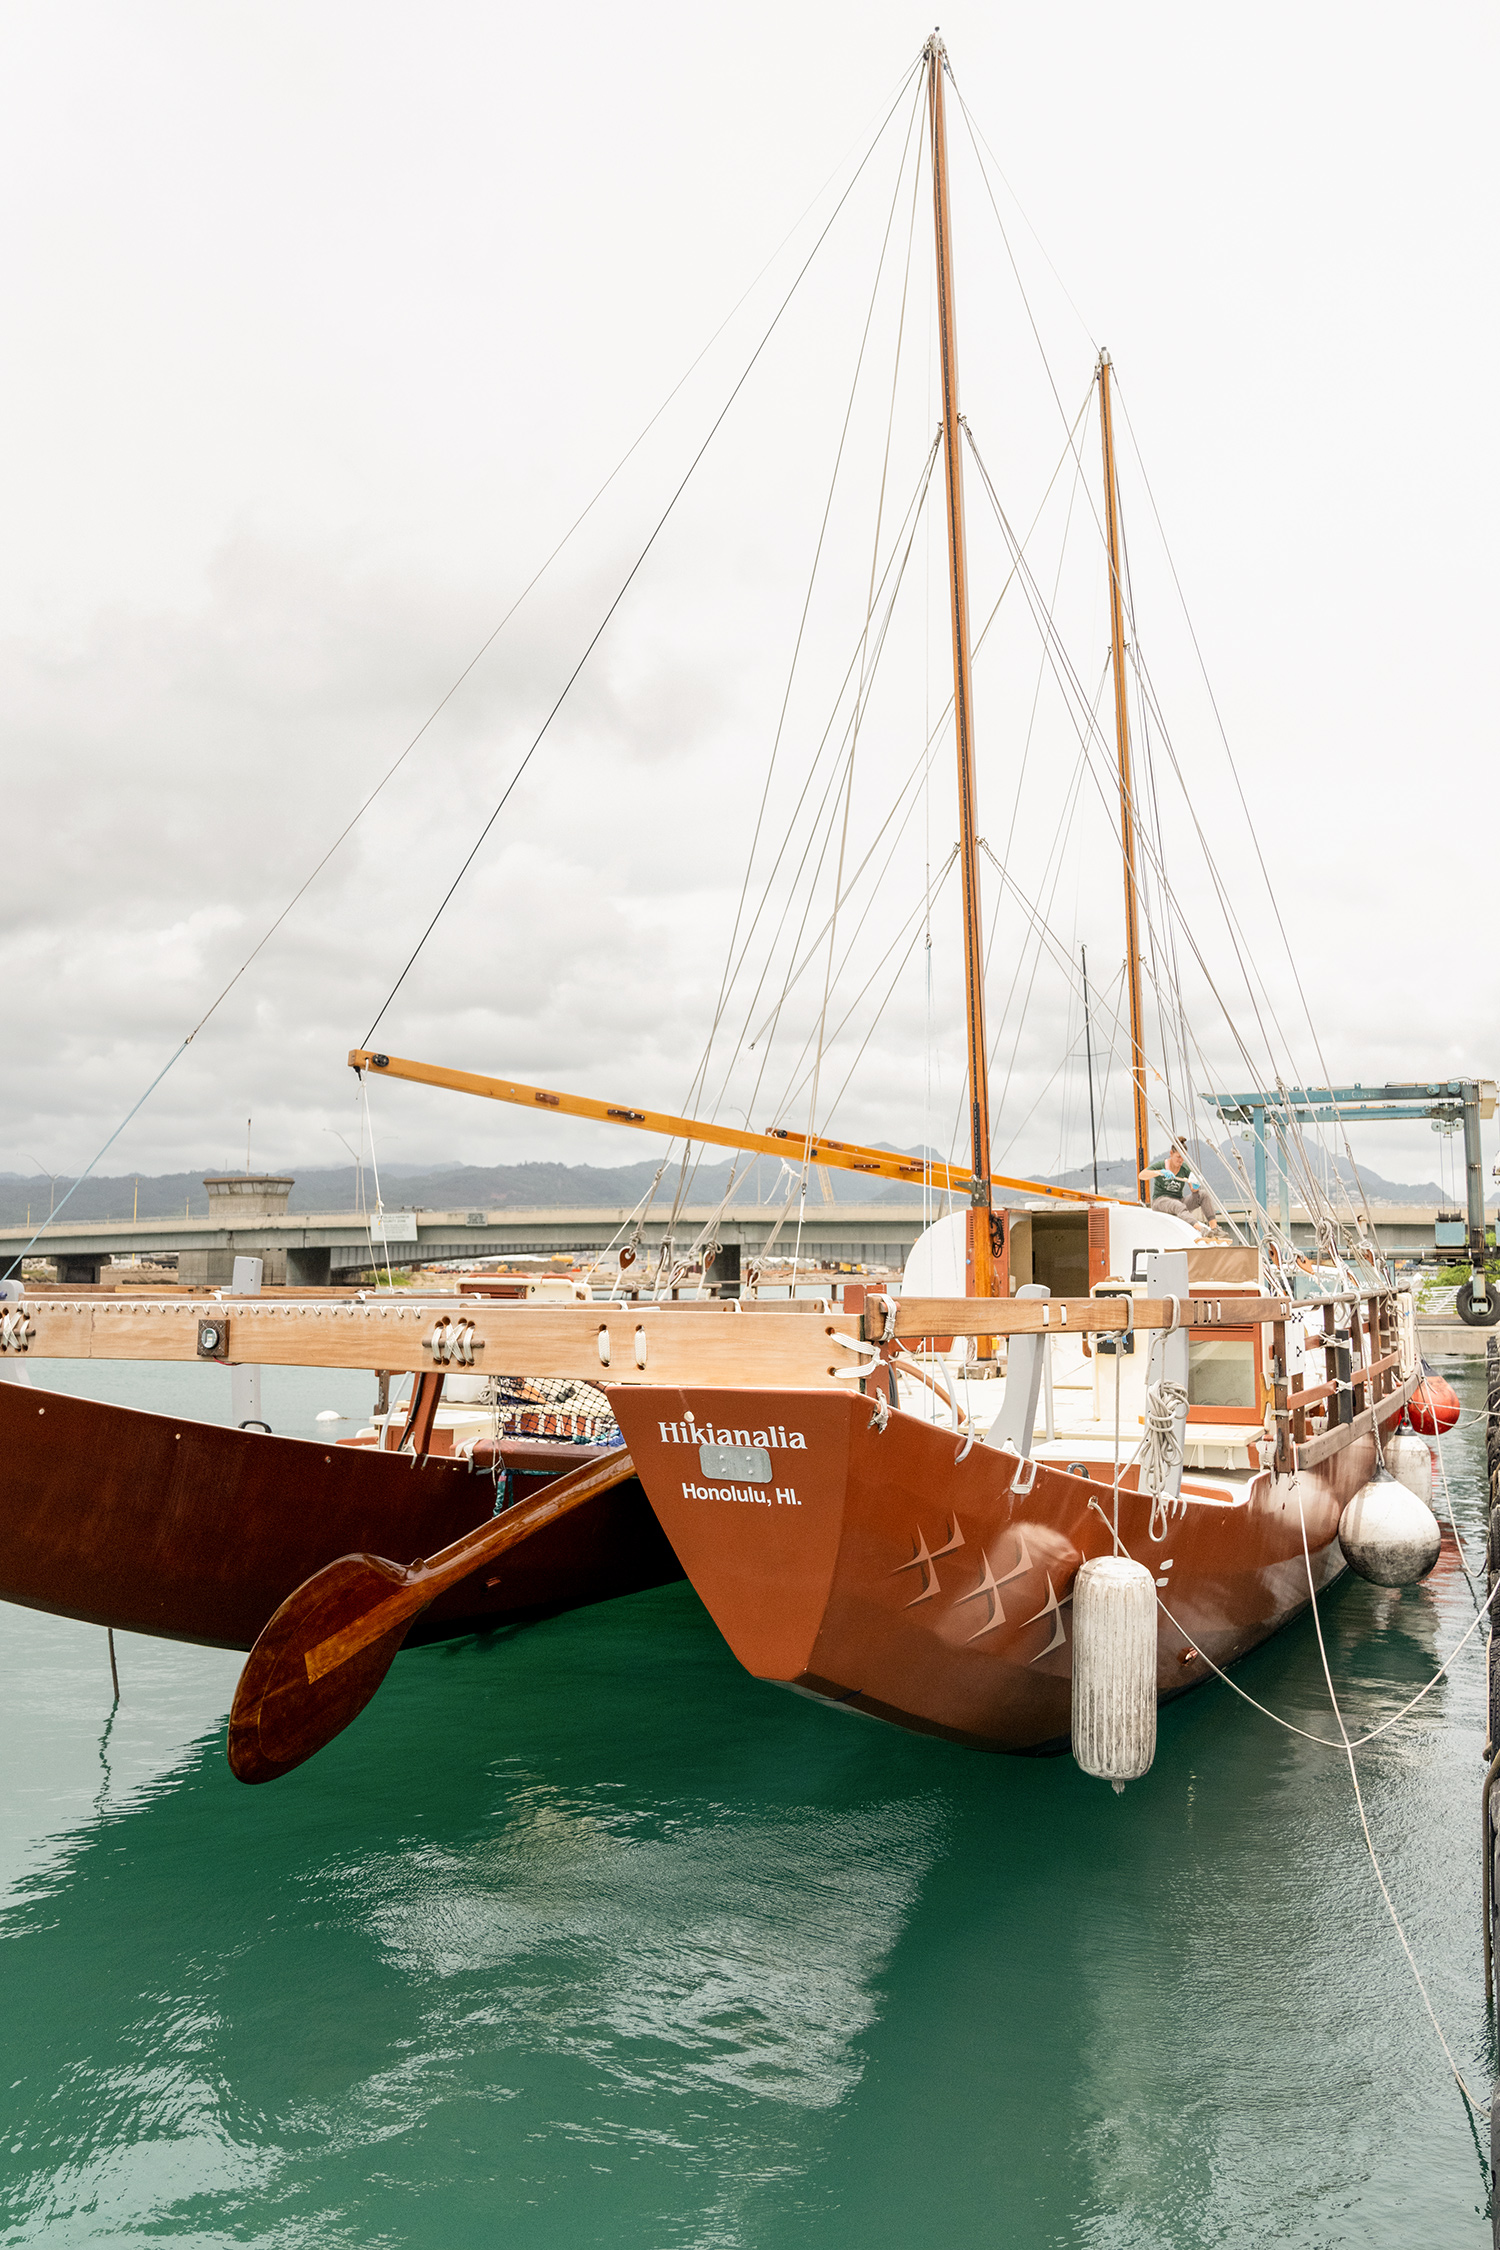 Photograph shows the front of a traditional Polynesian sailing canoe in wet dock in Hawaii. 